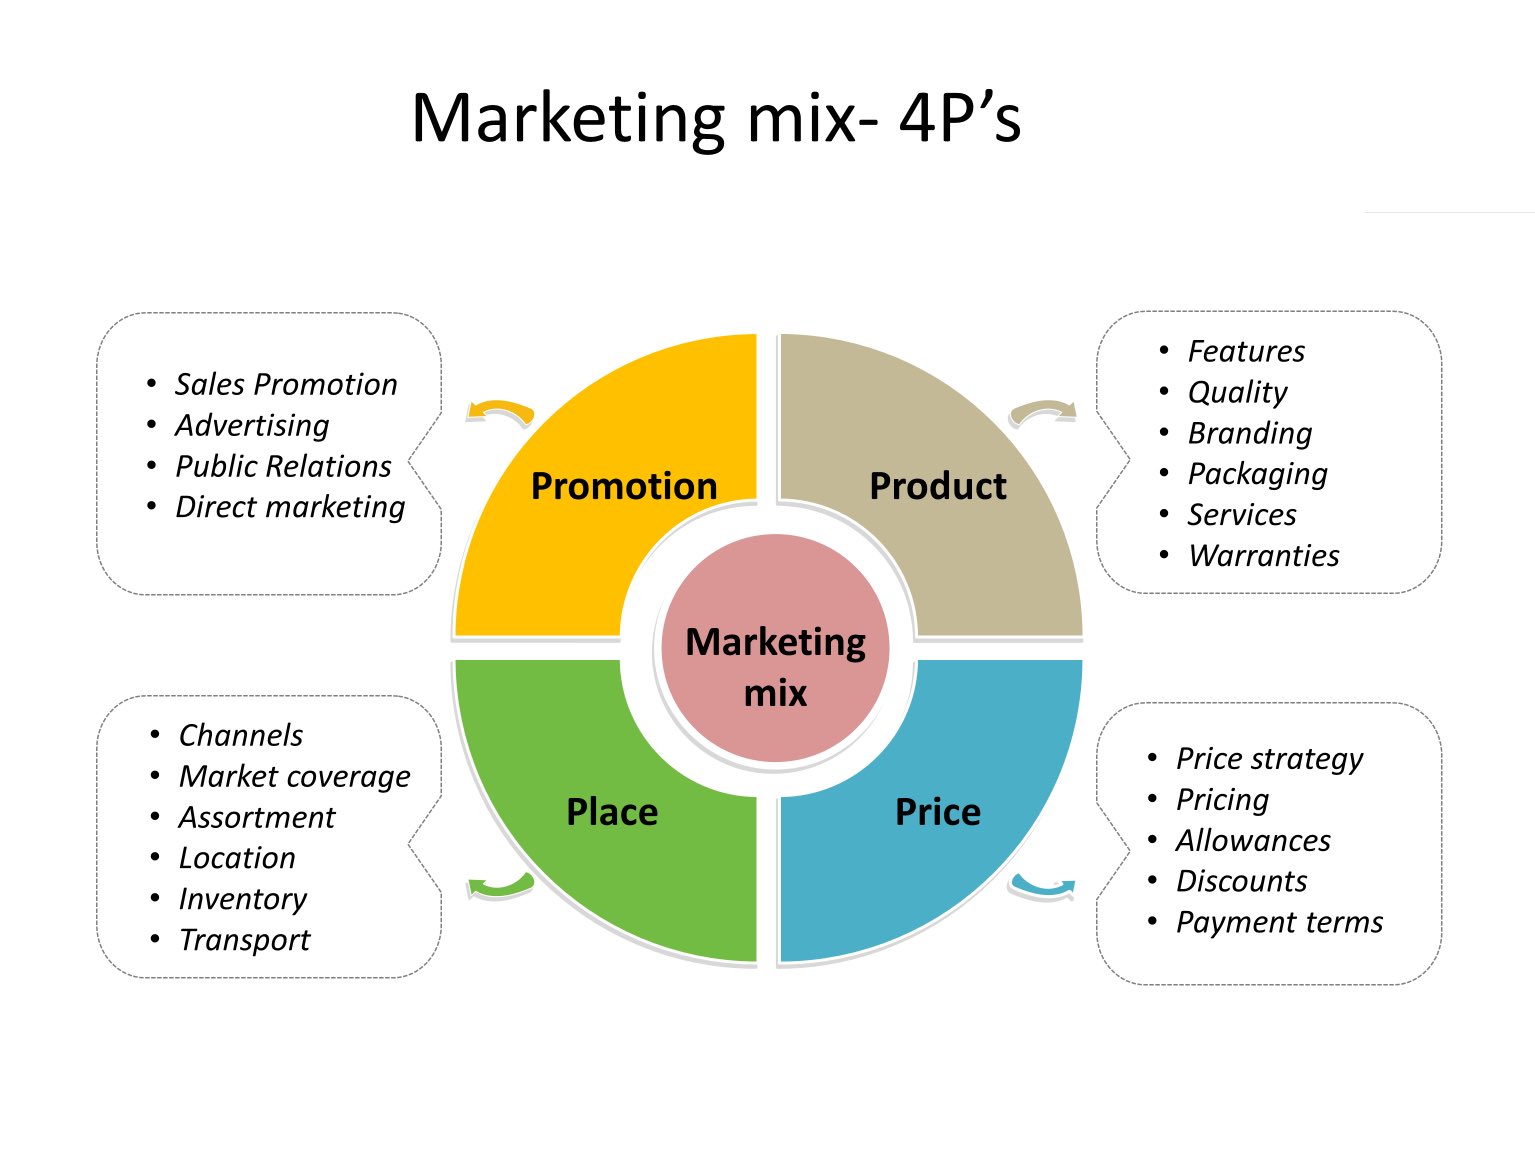 Prime pouch Våd Business Training Center - BTC on Twitter: "Marketing mix is a set of the  four key elements of a marketing strategy to pursue its marketing  objectives in the target market (product, price,